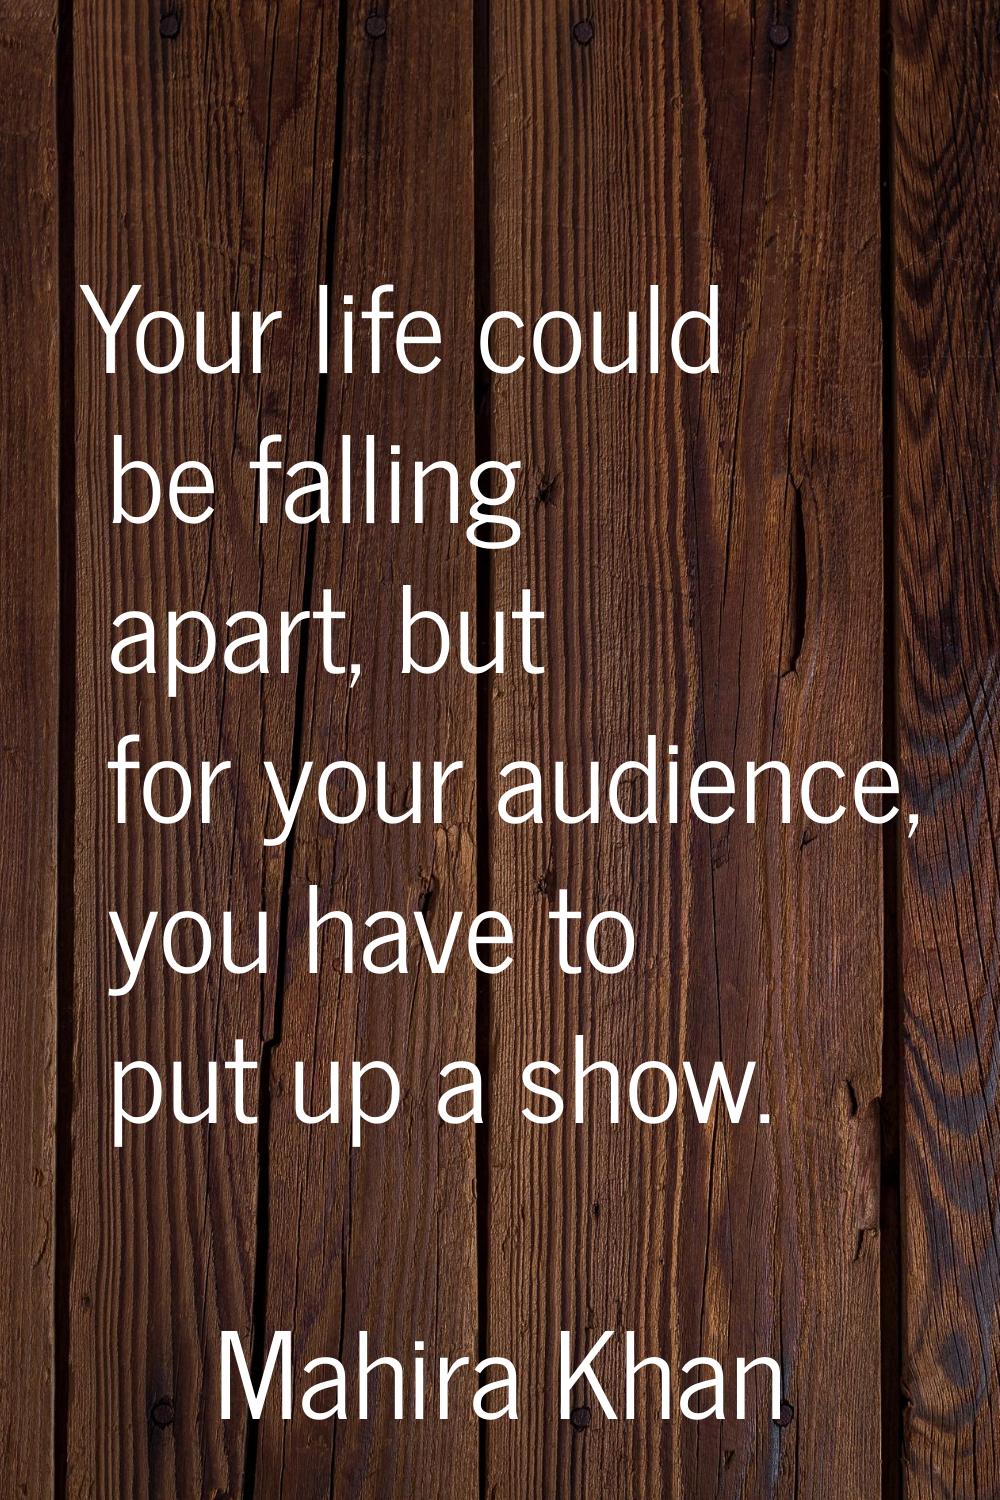 Your life could be falling apart, but for your audience, you have to put up a show.